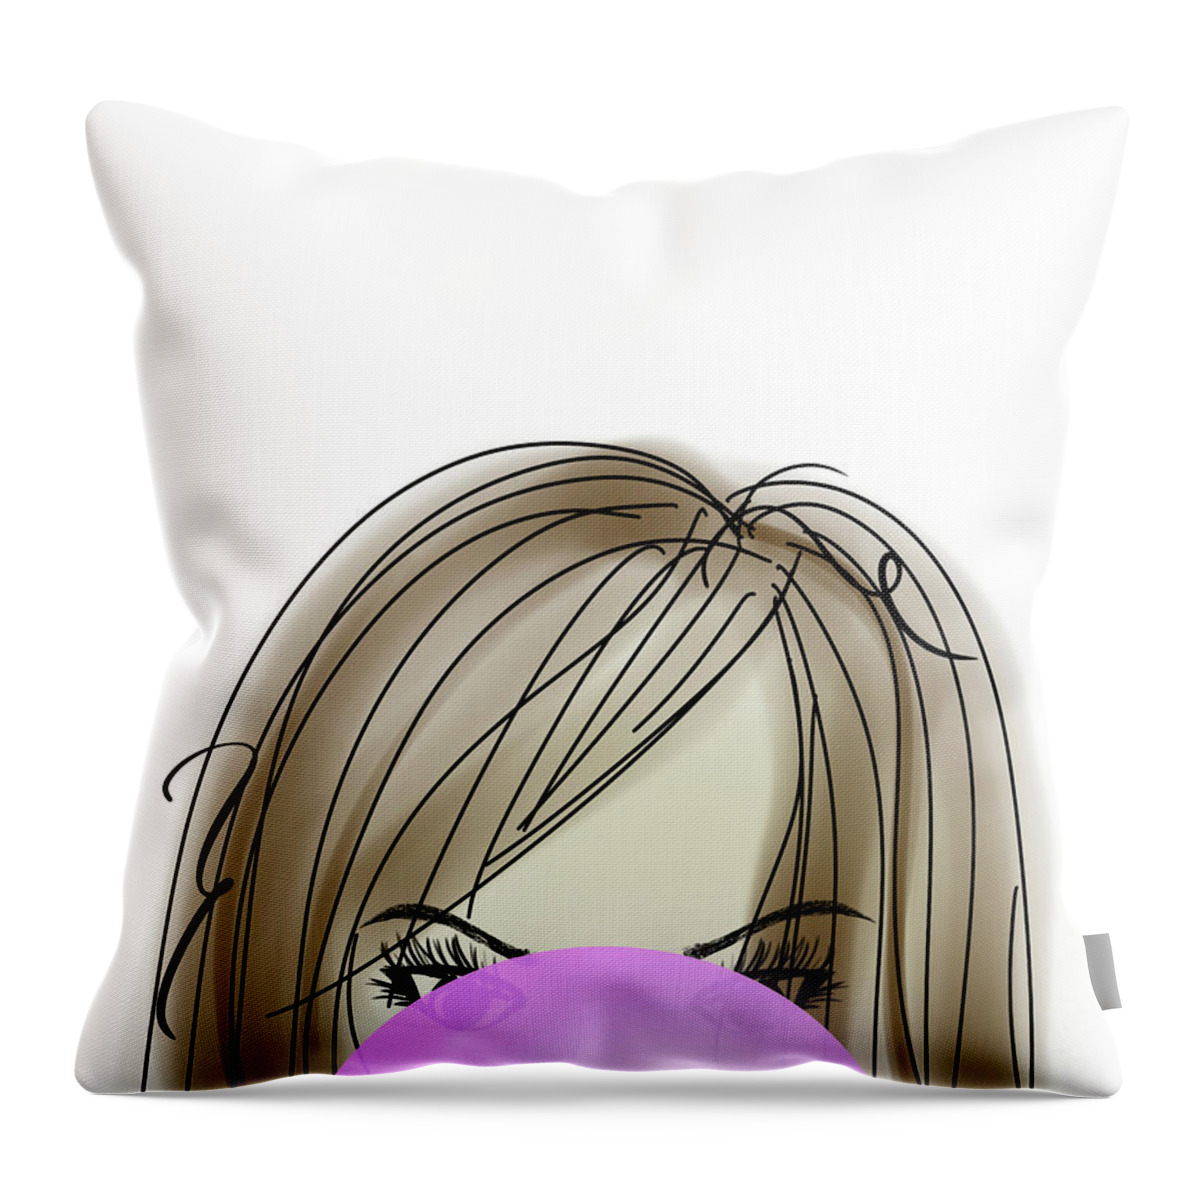 Visions Throw Pillow featuring the mixed media Visions Of Hair Style IIi by Sundance Q